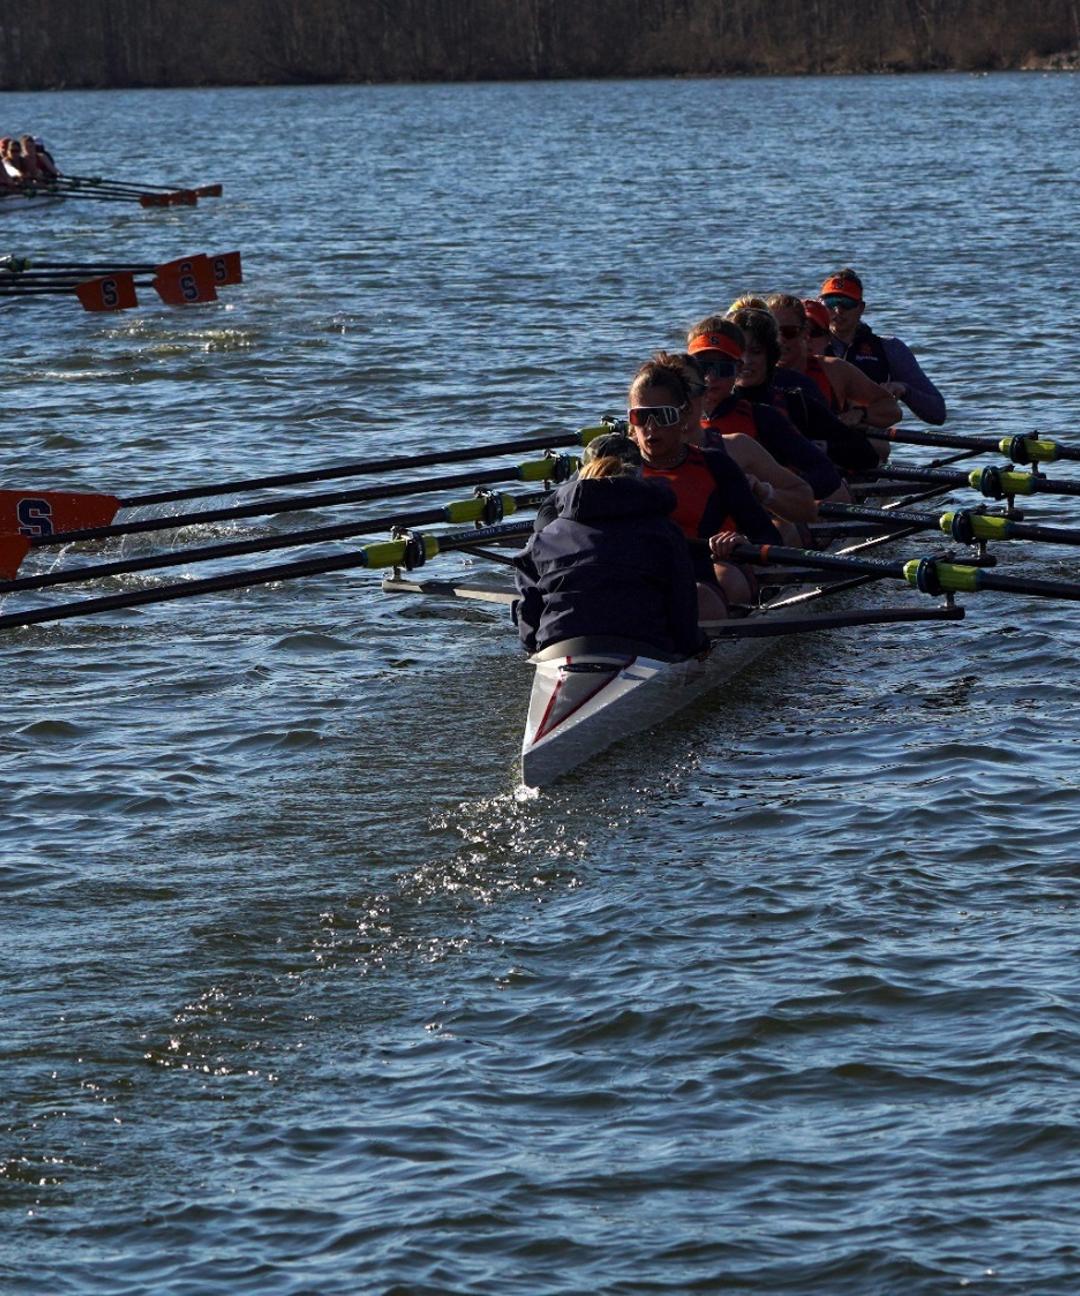 Image related to Rowing Climbs to #8 in National Rankings